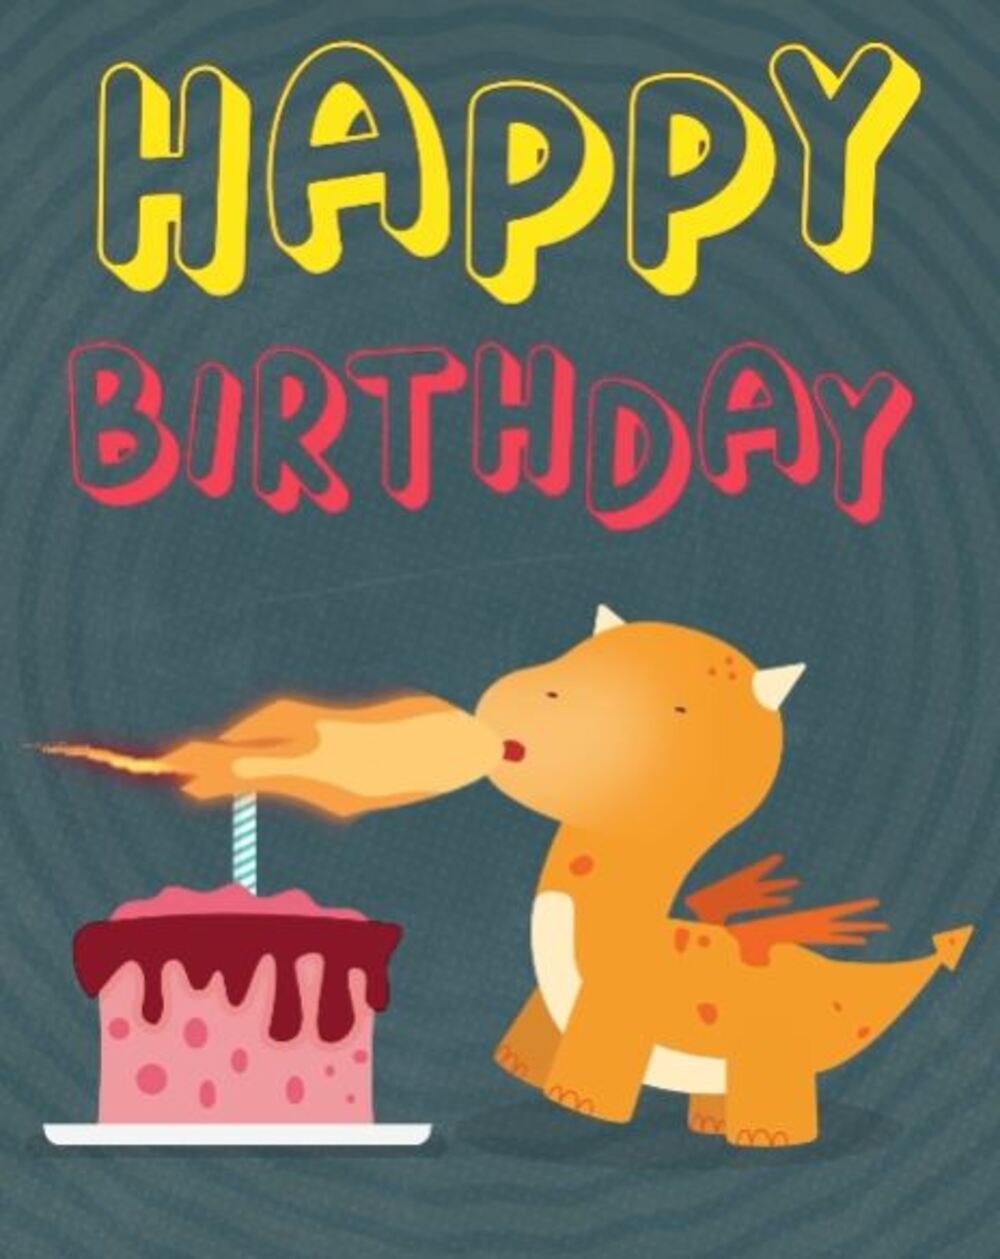 10 20+ Cute and Funny Happy Birthday Free Animated GIFs